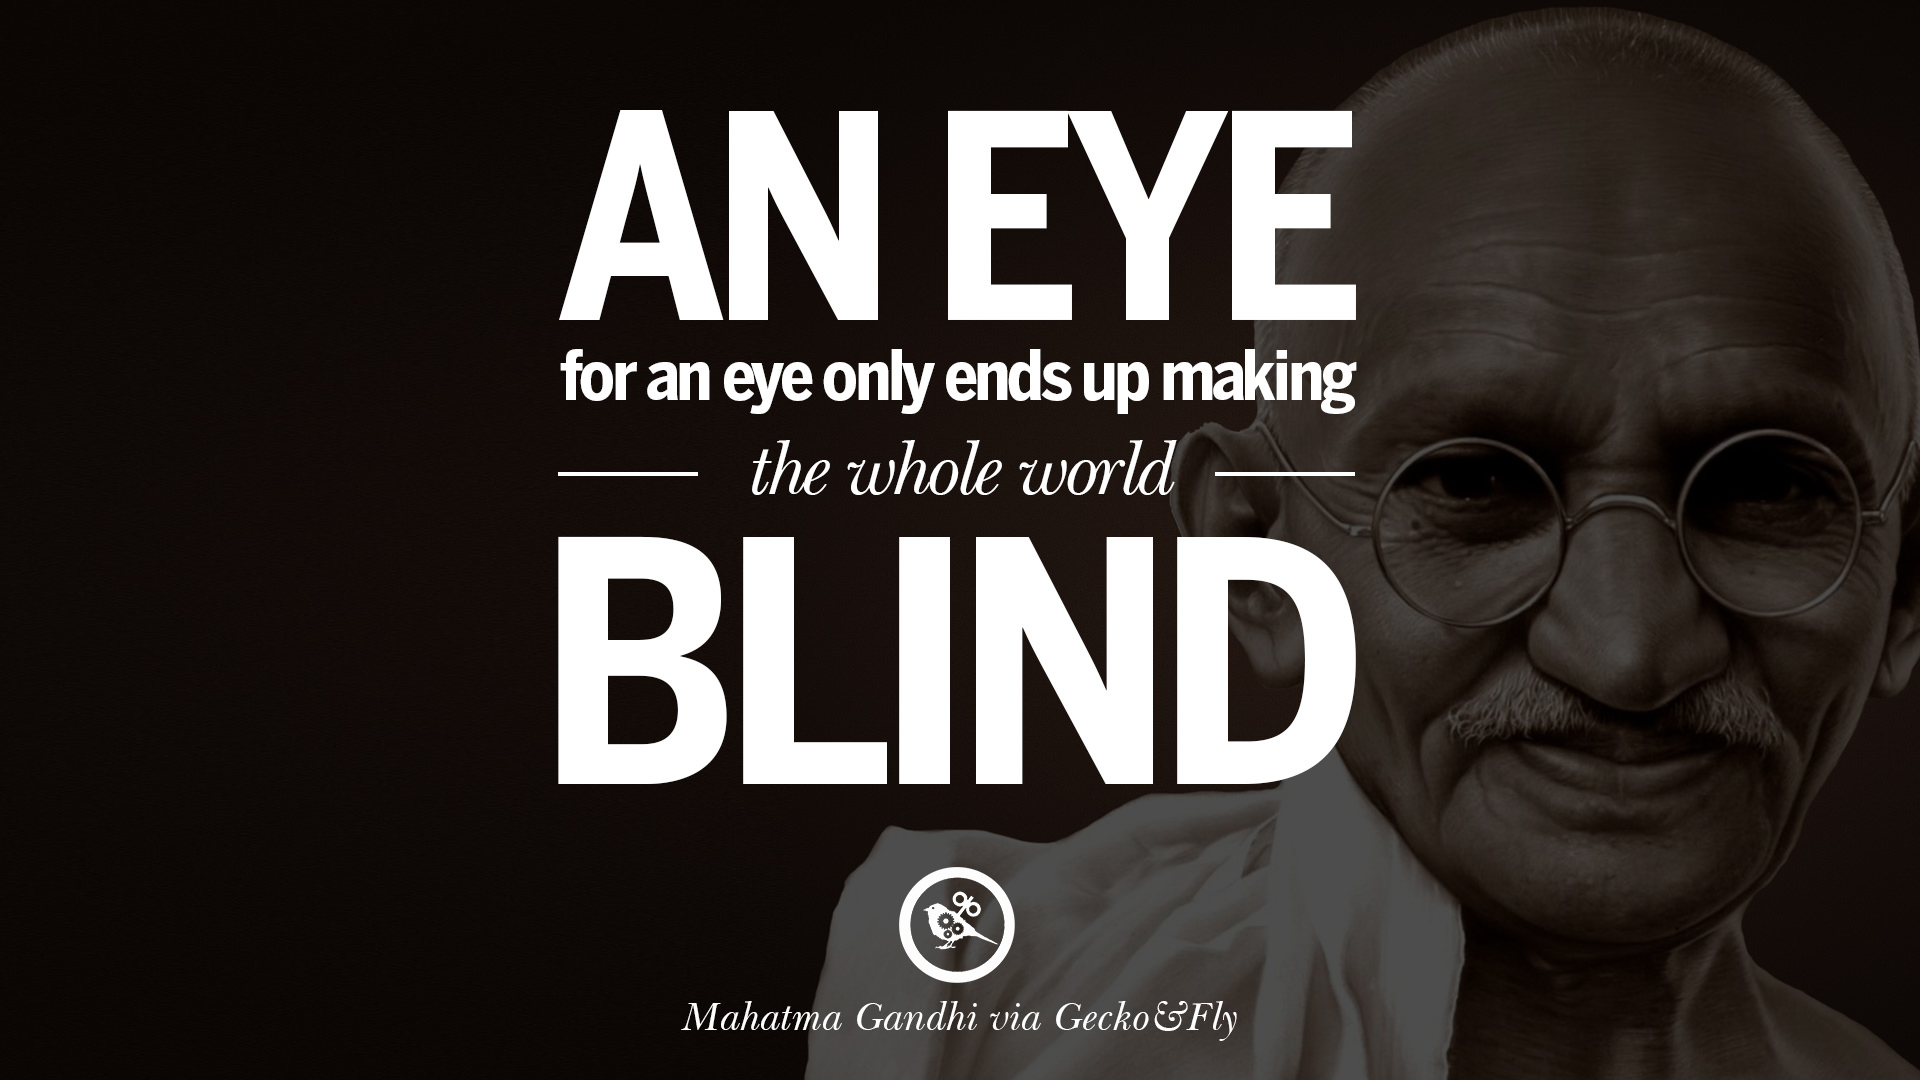 28 Mahatma Gandhi Quotes And Frases On Peace, Protest, and Civil Liberties